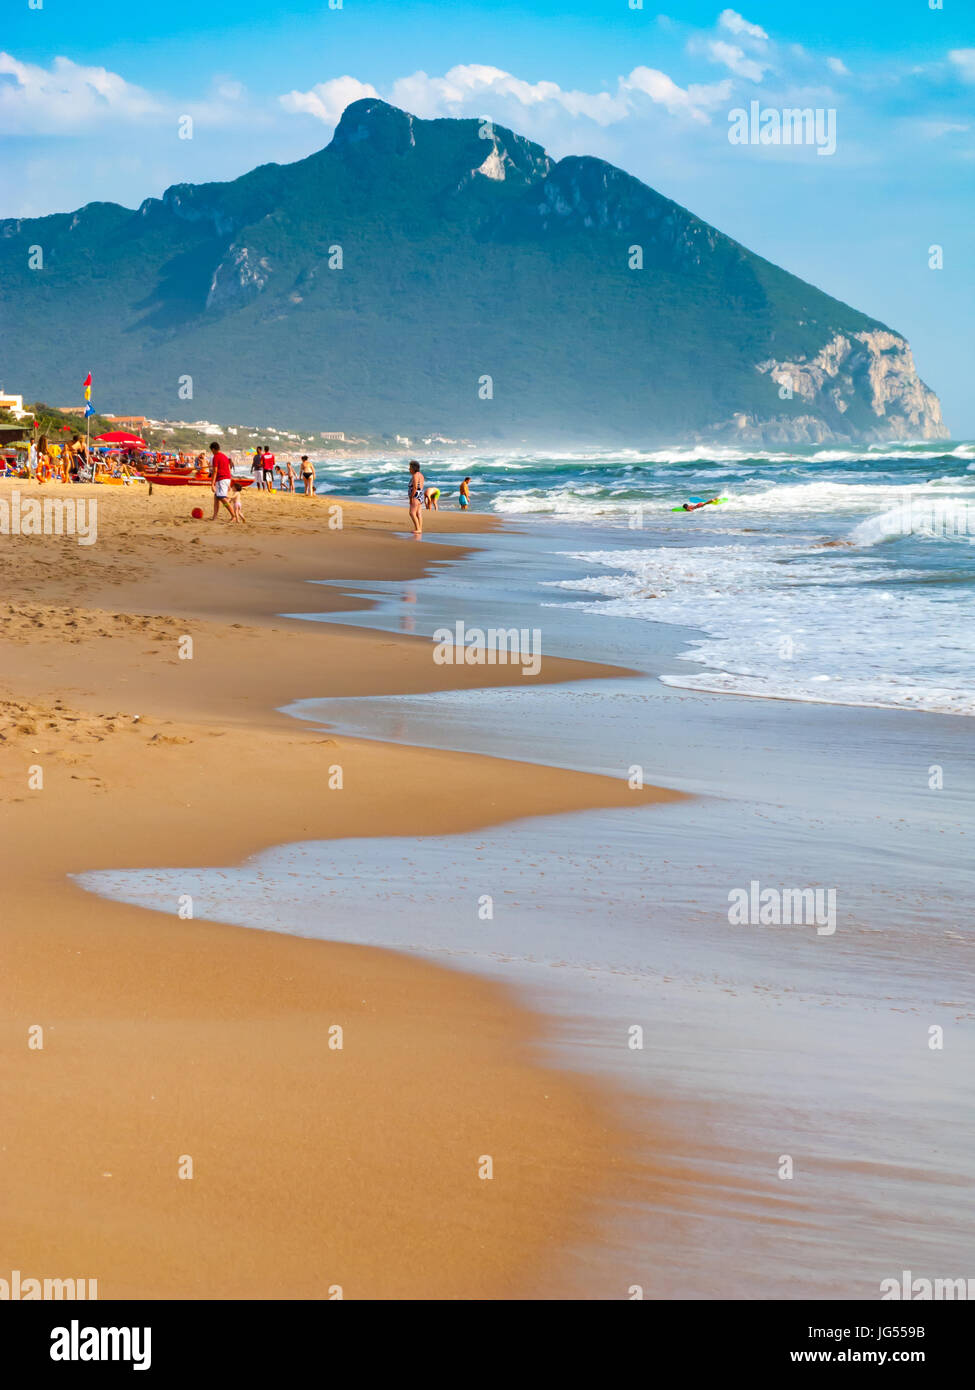 The Beach at Sabaudia, Latina, Lazio, Italy. A beautiful beach ideal for families. The beach is filled with umbrellas and parasols for hotel guests. Stock Photo